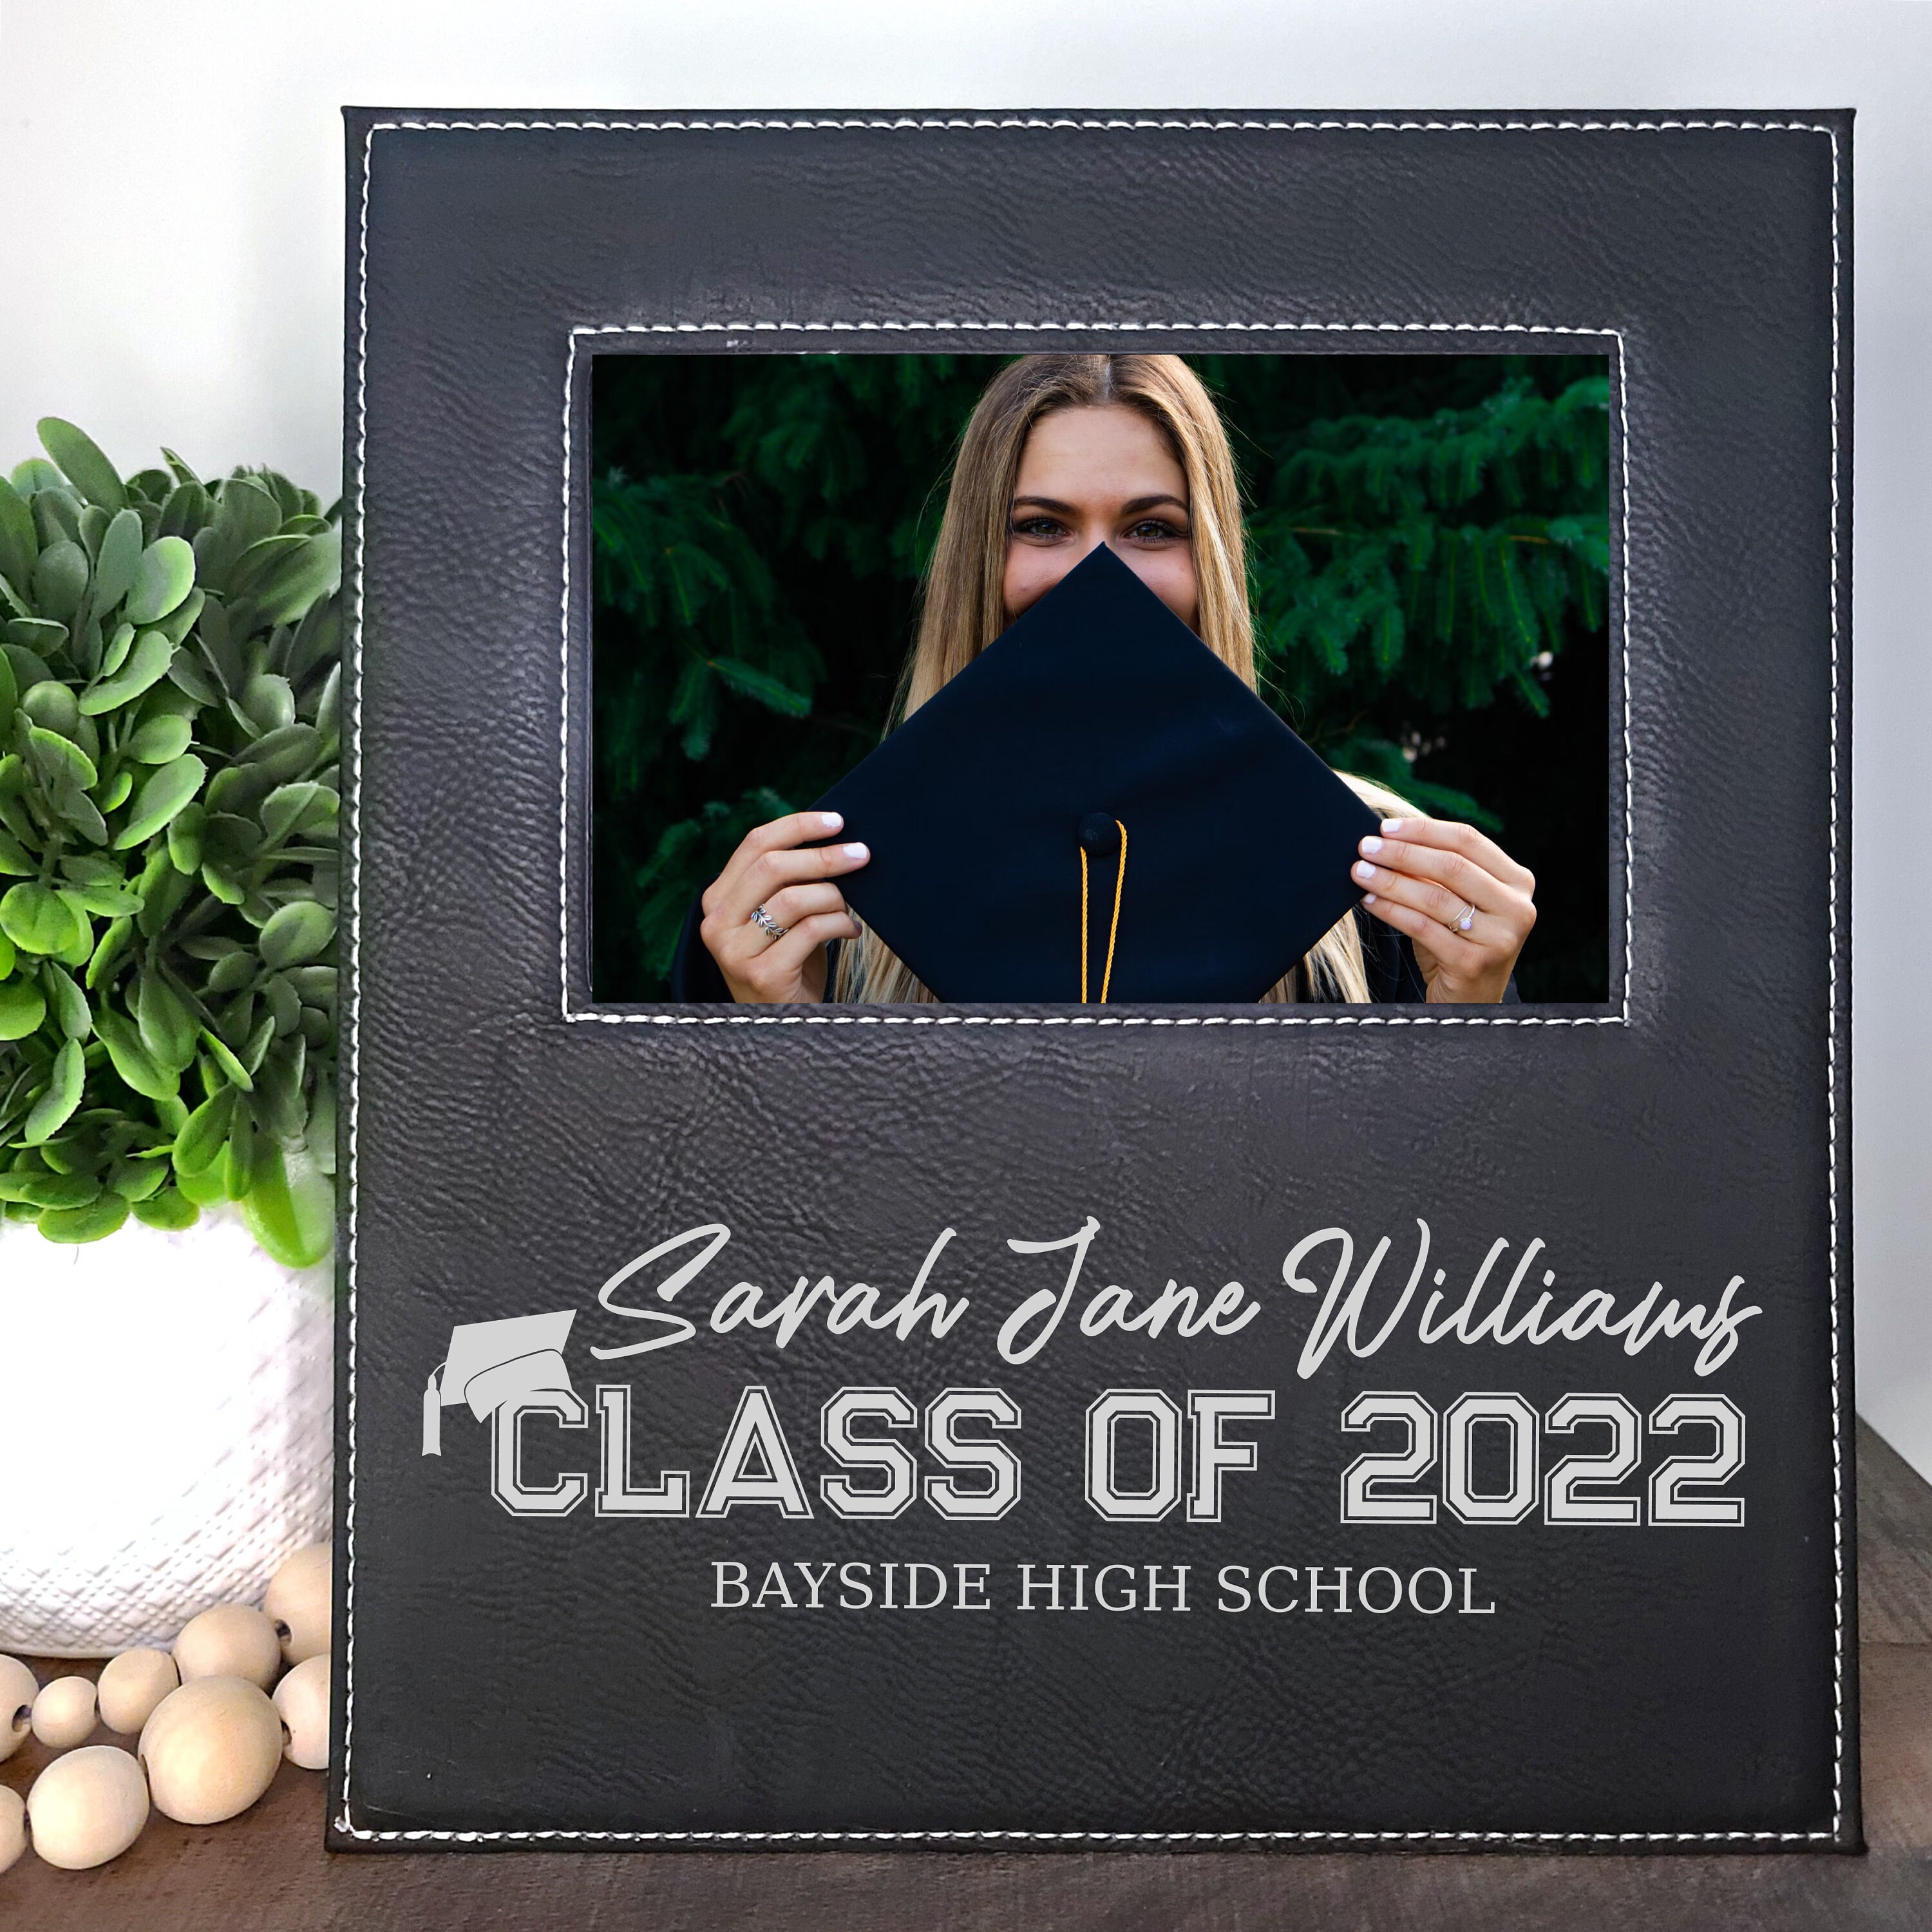 Graduation-Achievement Glass Picture Frame 6x4 With Stand Very  Congratulatory